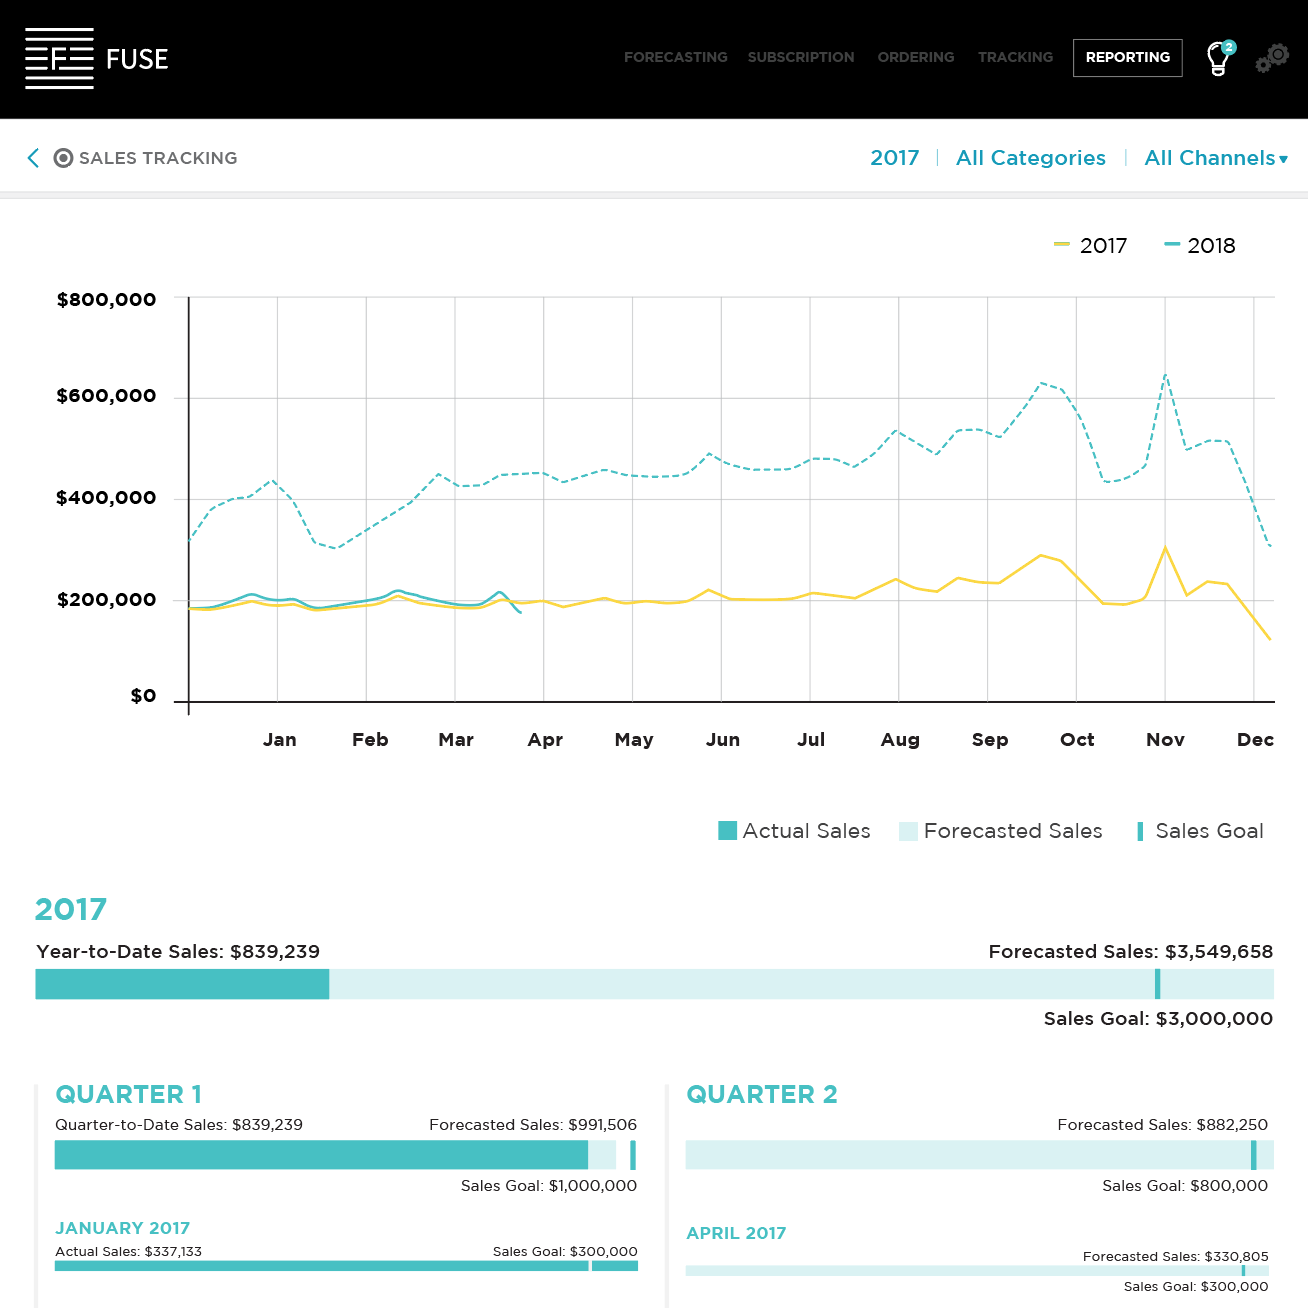 Thumbnail of a page I designed for Fuse's Sales Tracking software.